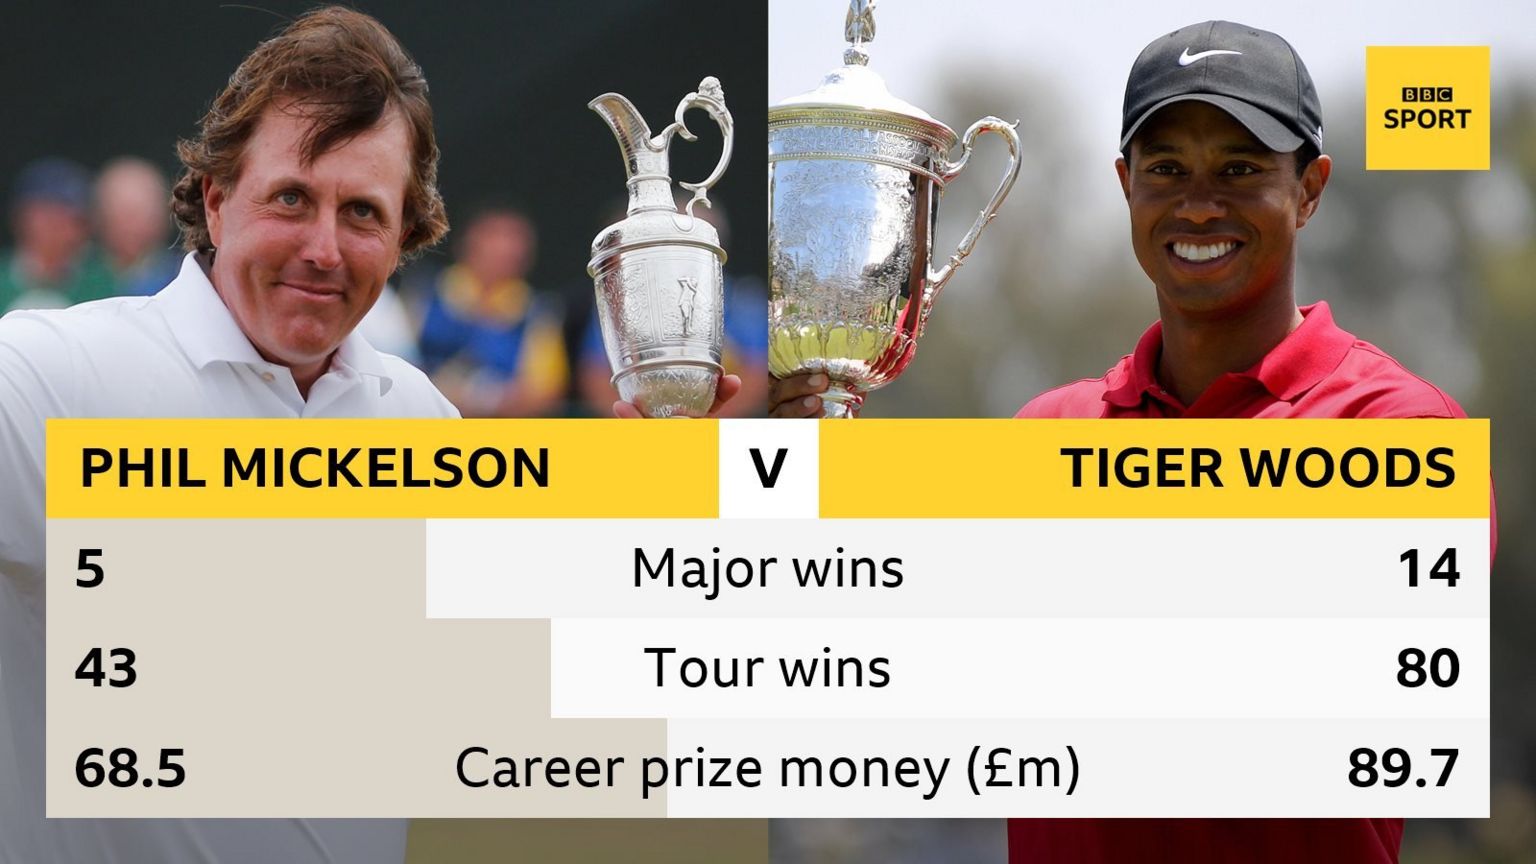 Graphic showing the respective career achievements of Phil Mickelson and Tiger Woods